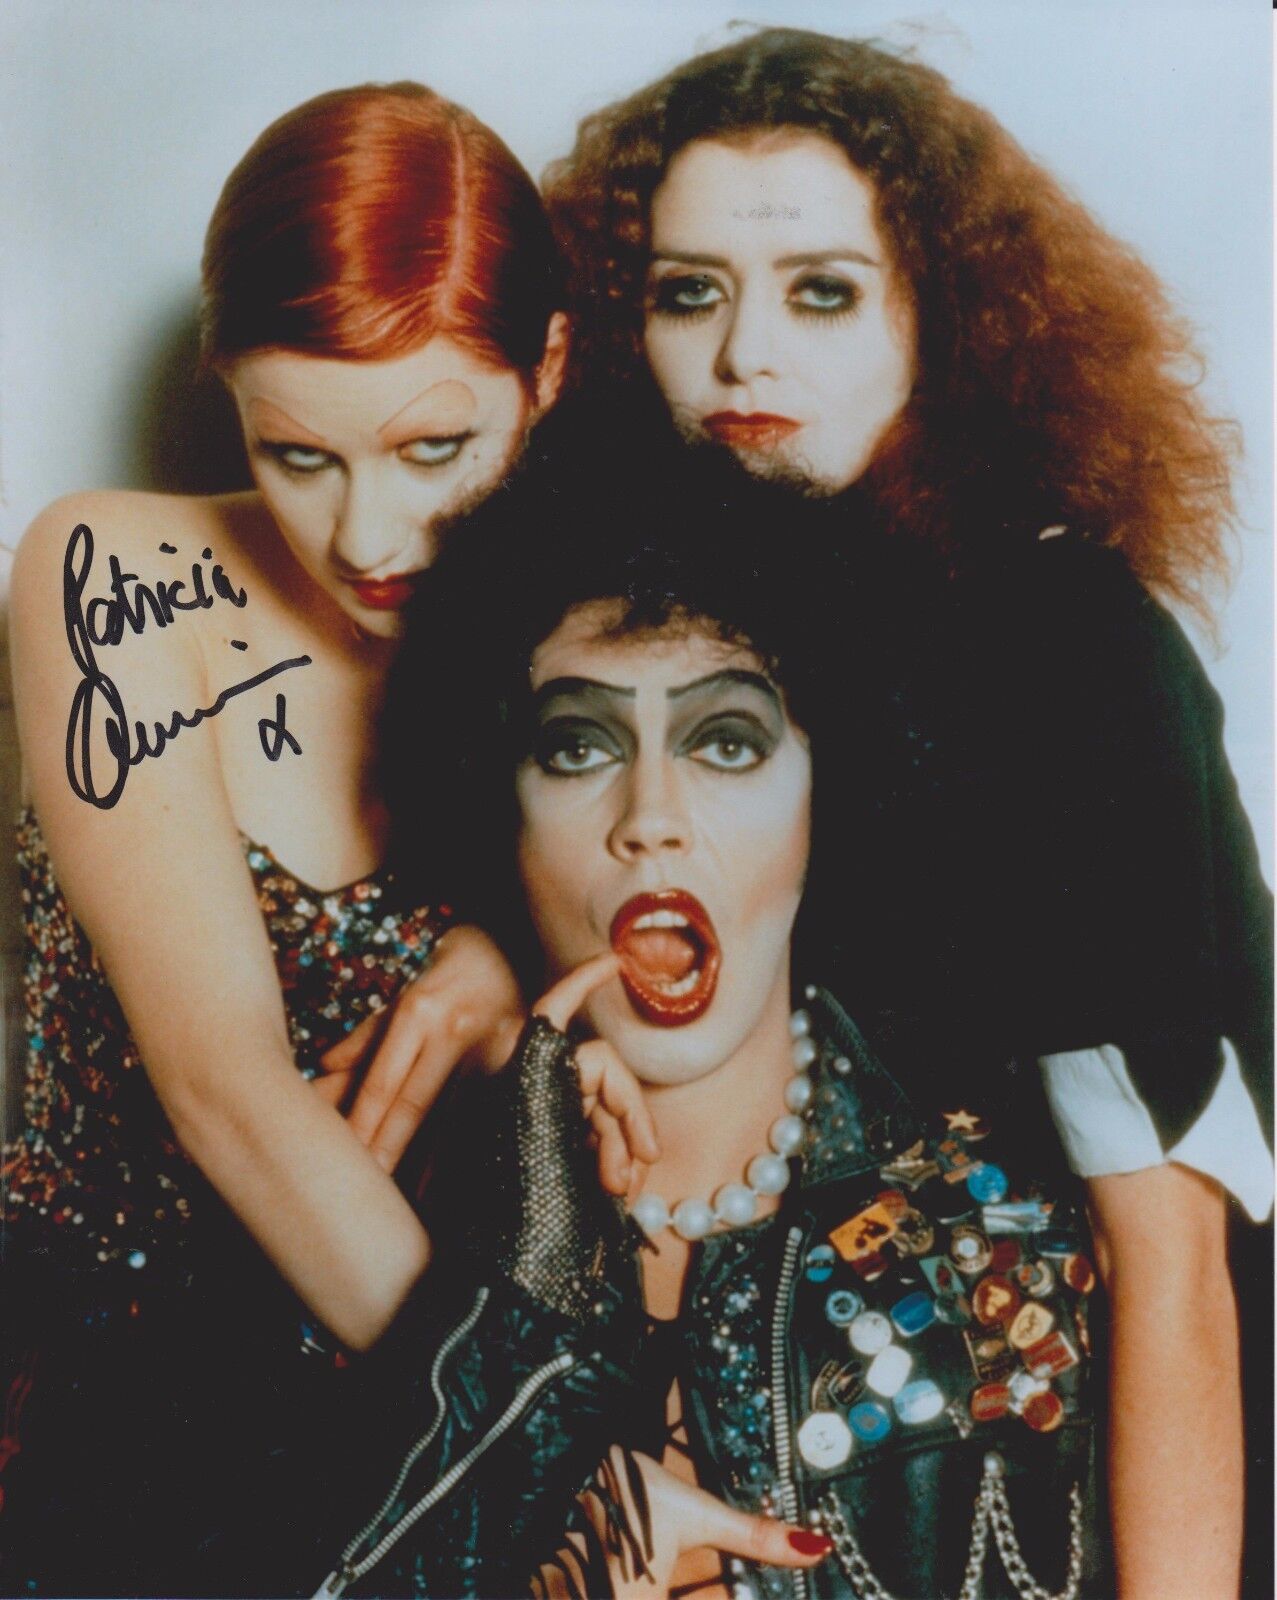 Patricia Quinn Rocky Horror 16 Original Autographed 8X10 Photo Poster painting